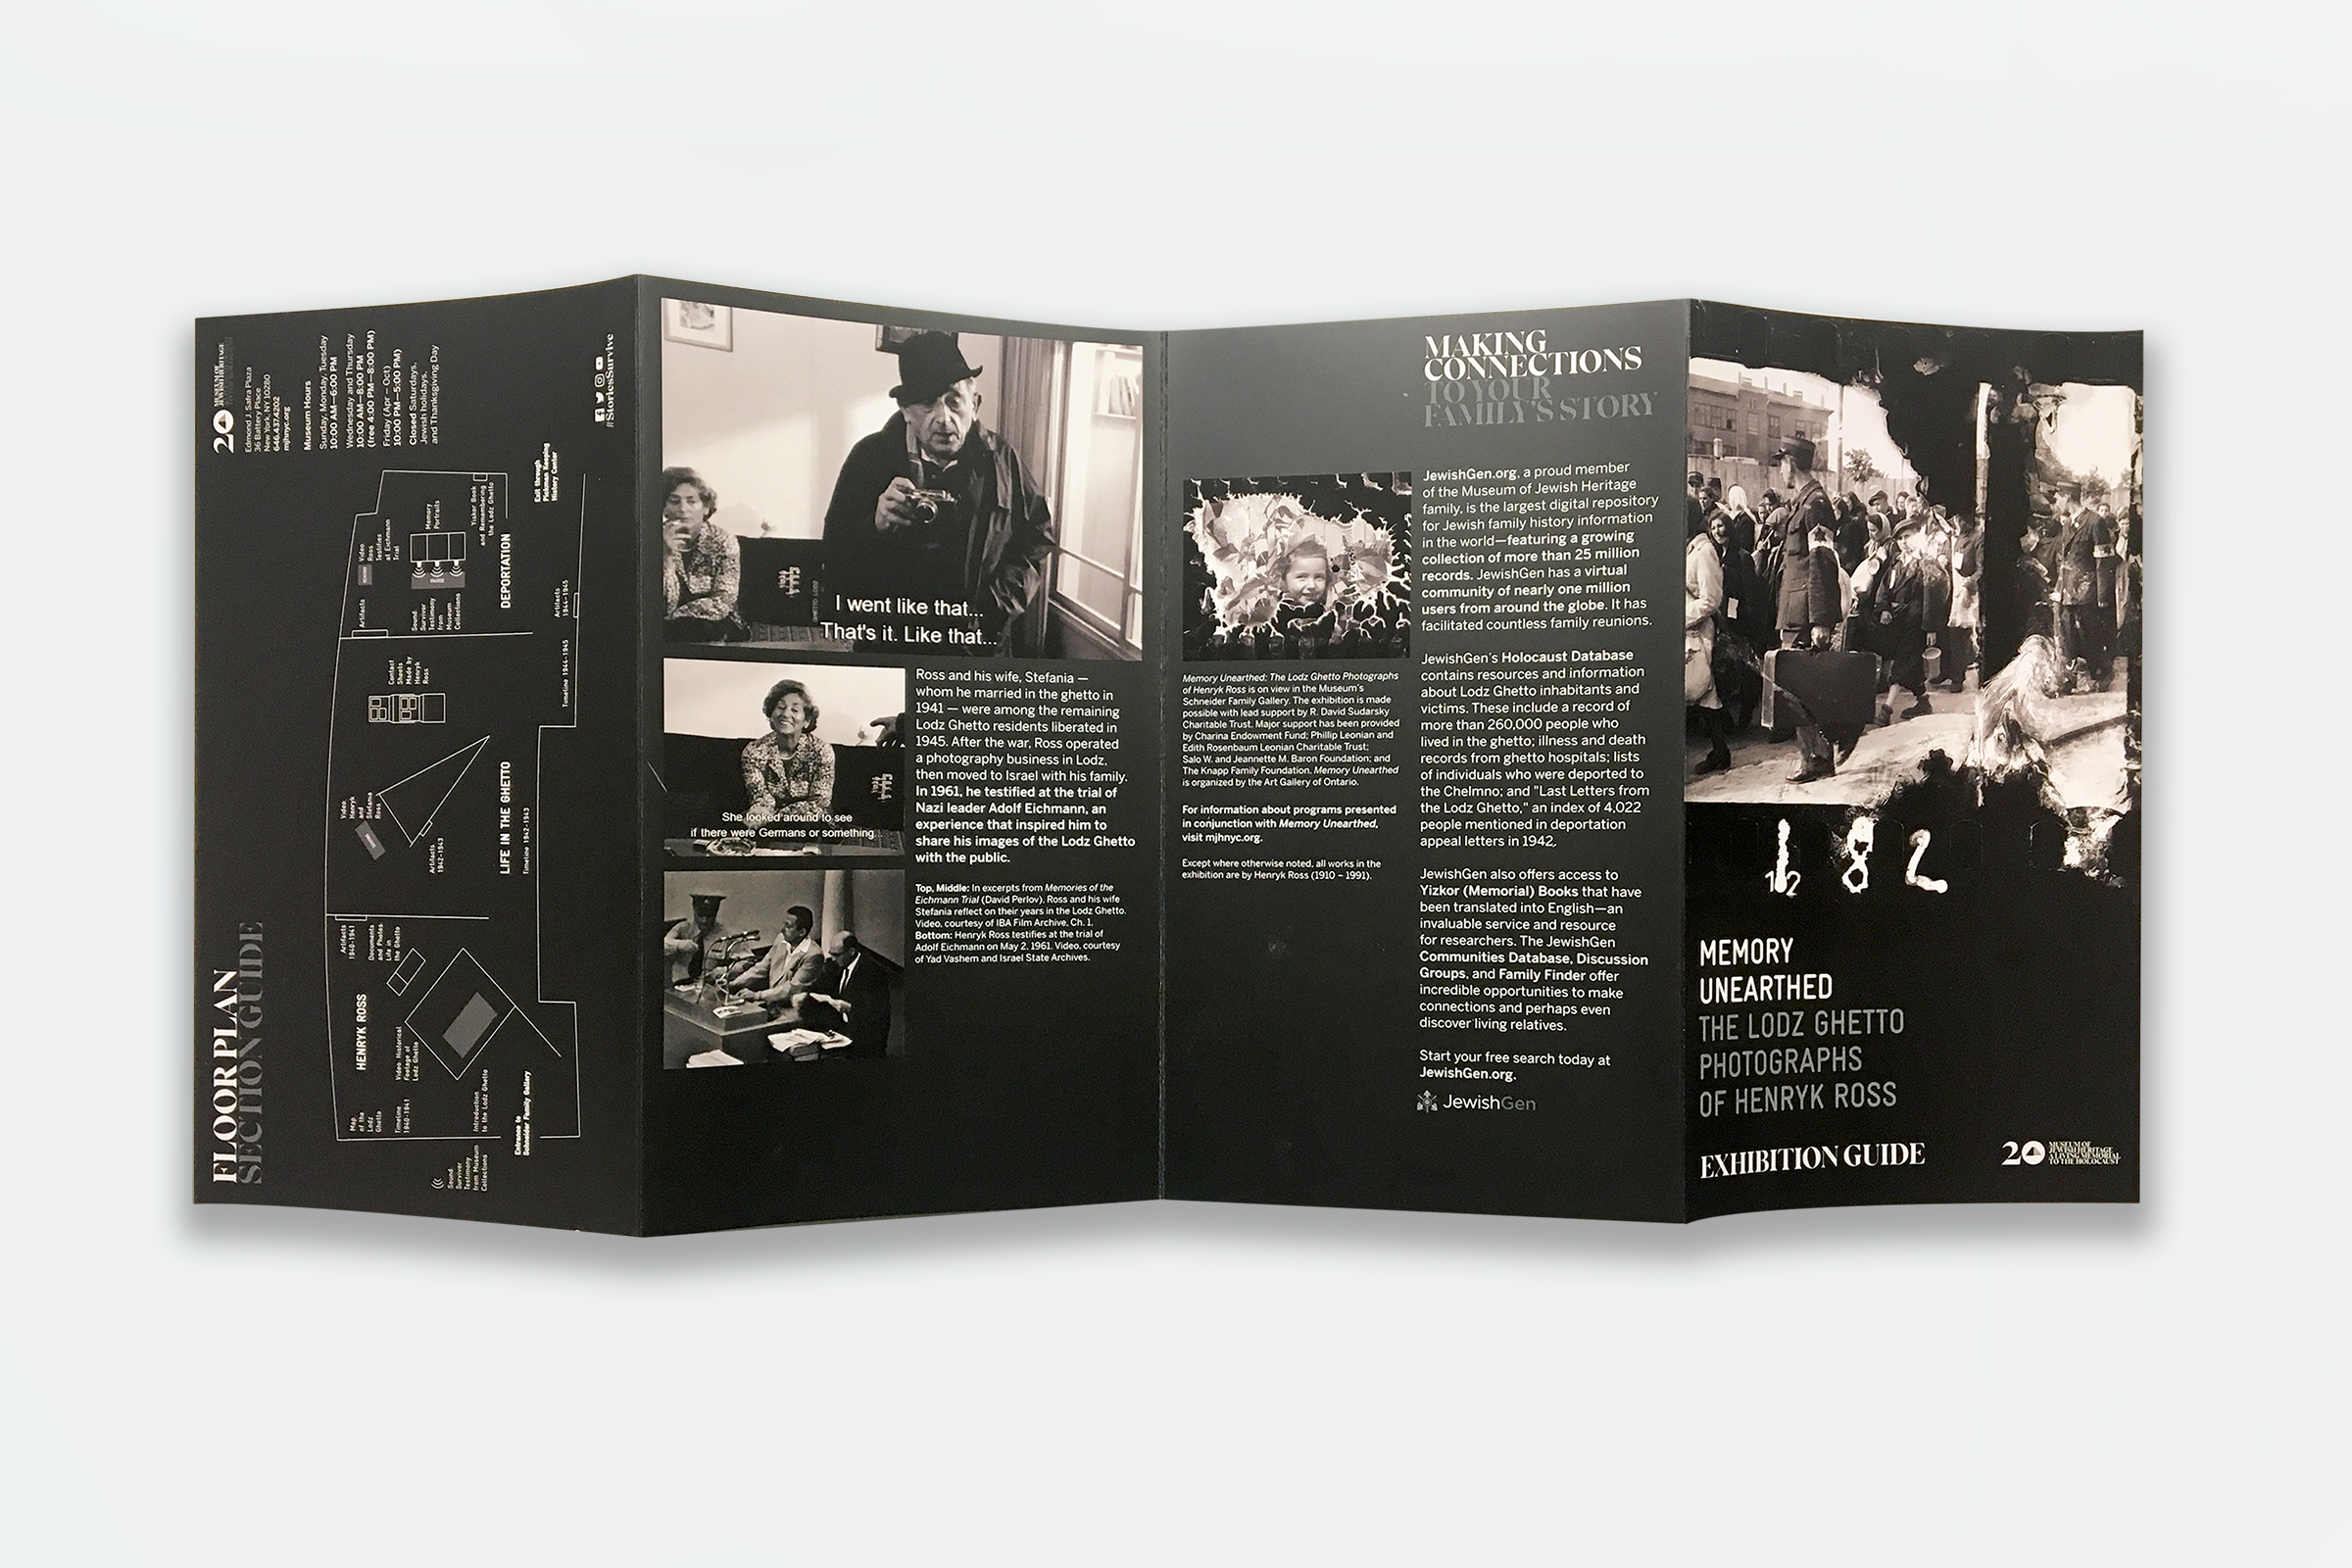 Pure+Applied designed the Memory Unearthed exhibition guide.